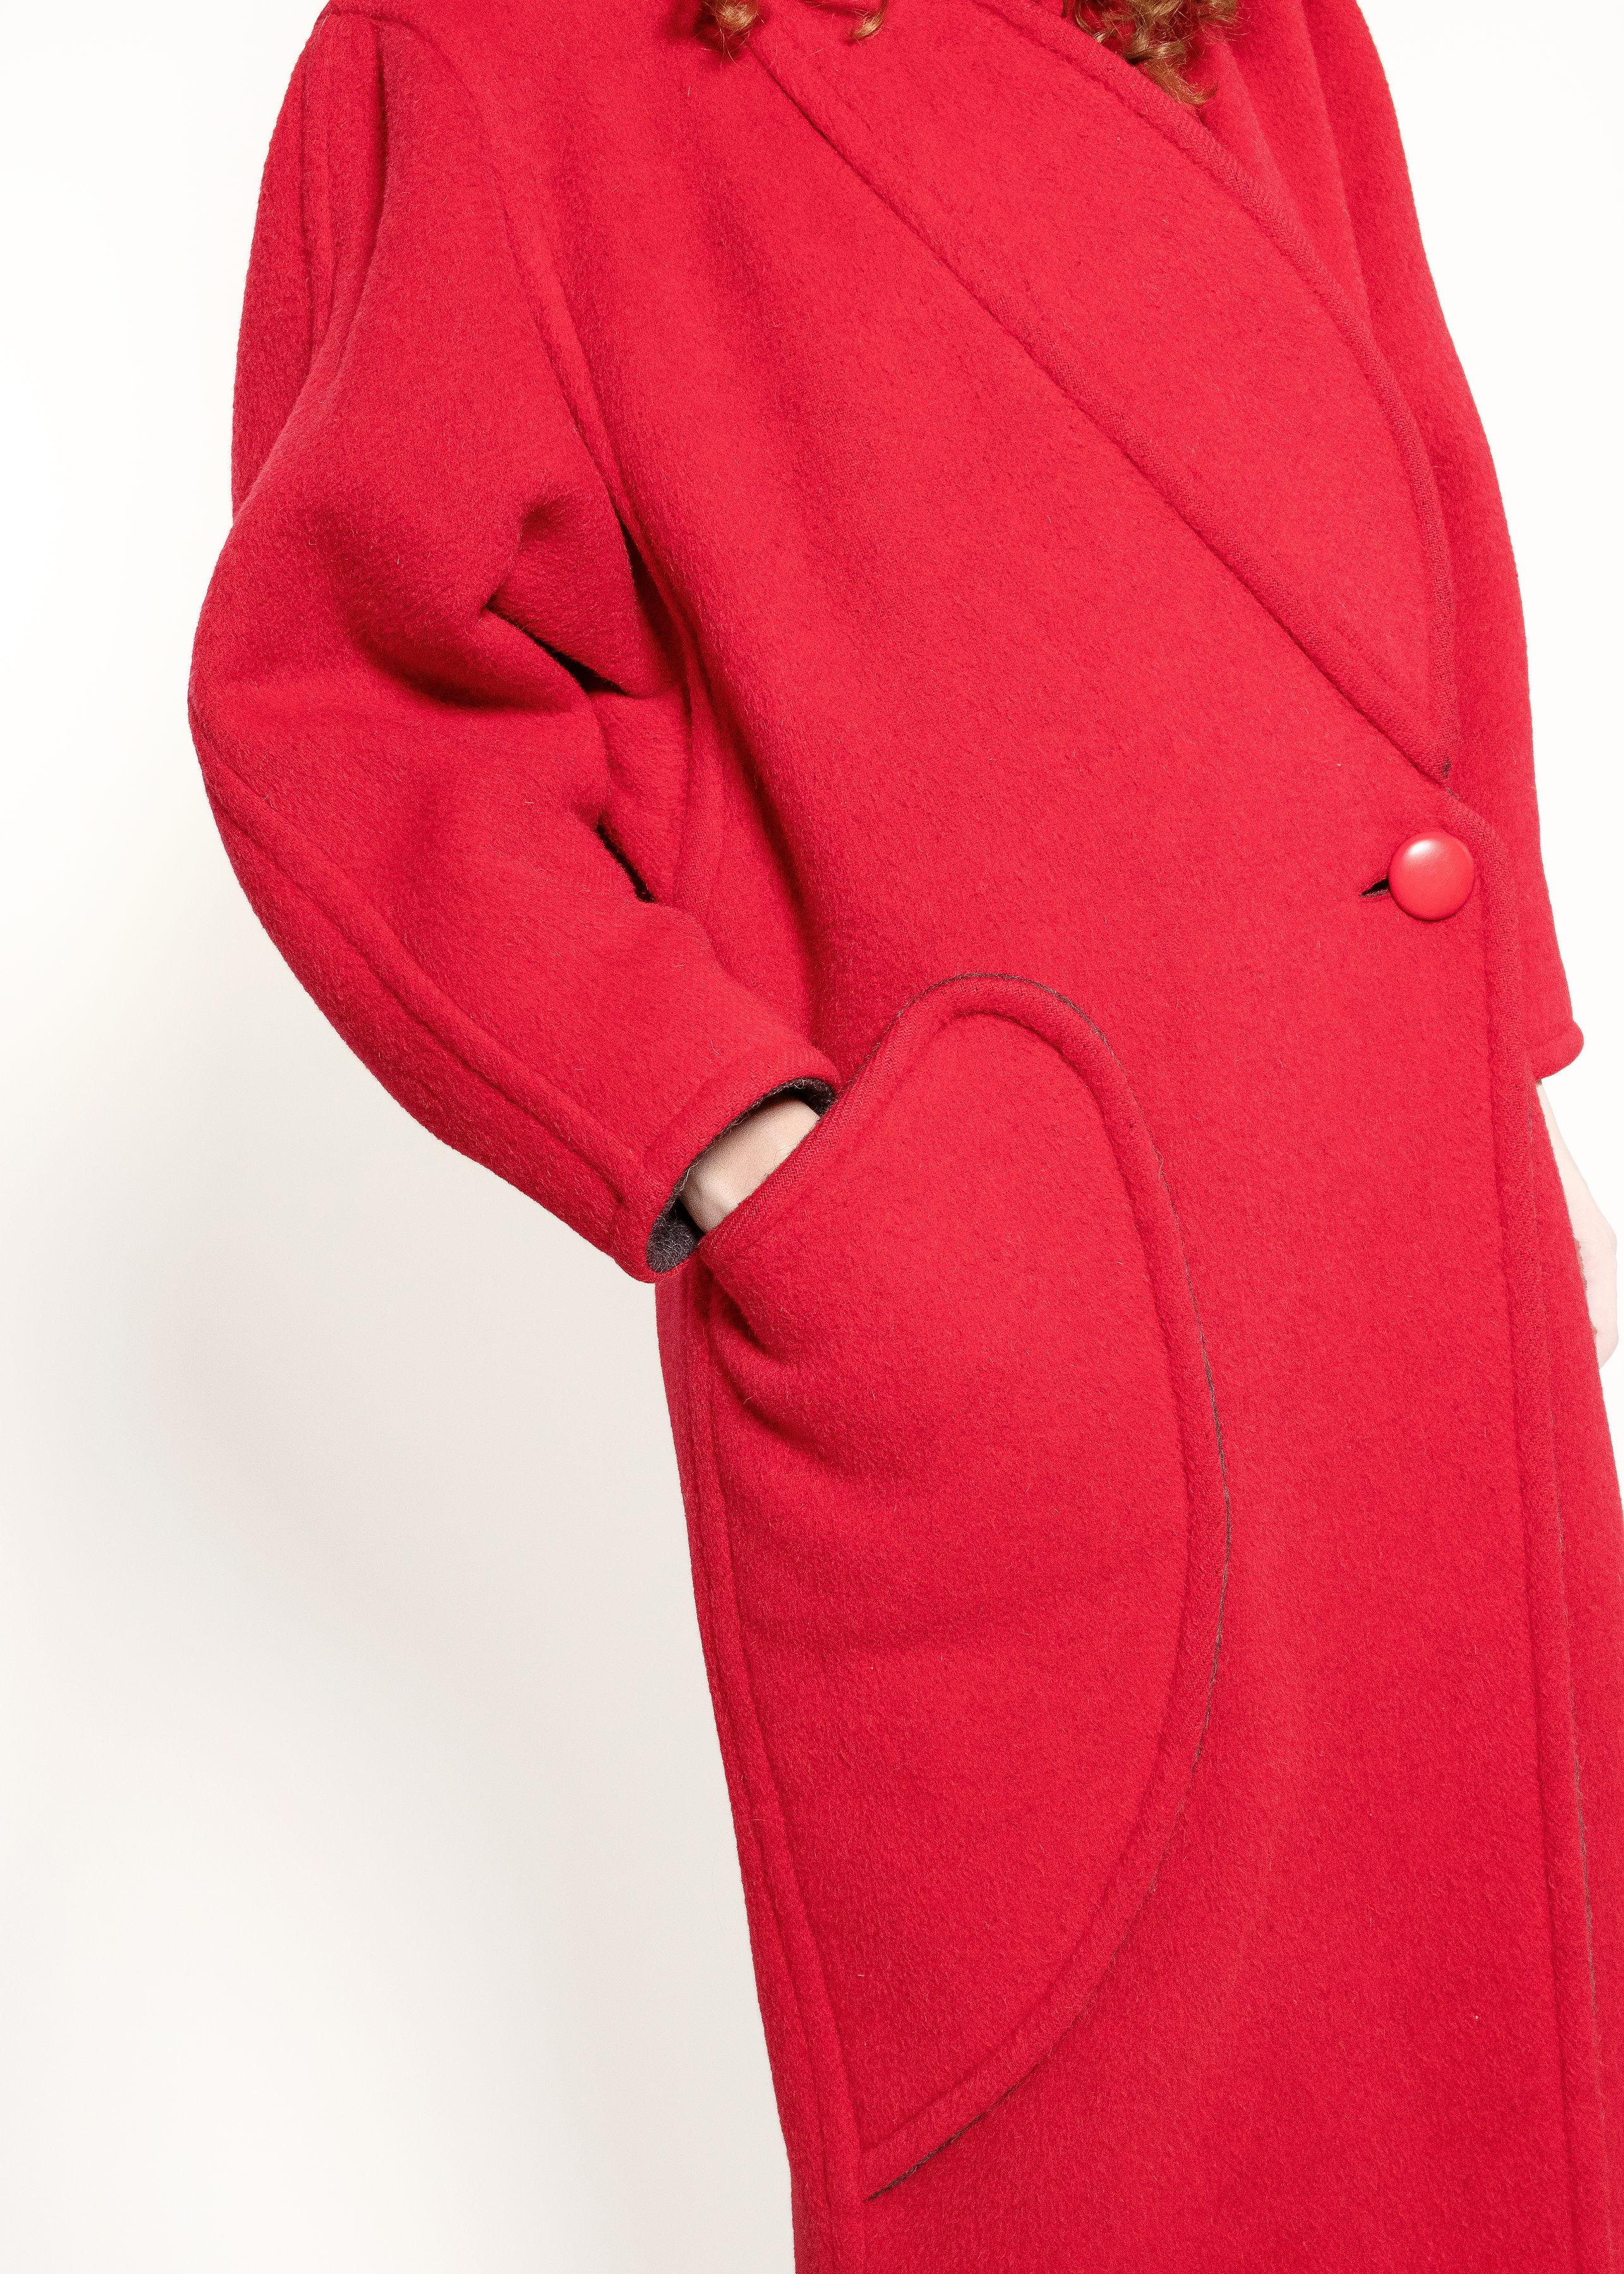 This Courreges Red Wool Coat combines the luxurious warmth of natural wool with the unique texture of lama and alpaca, making it perfect for those cold winter days!

Made from 30% lama, 20% alpaca, 20% wool, 20% mohair and 10% guanaco. It has one